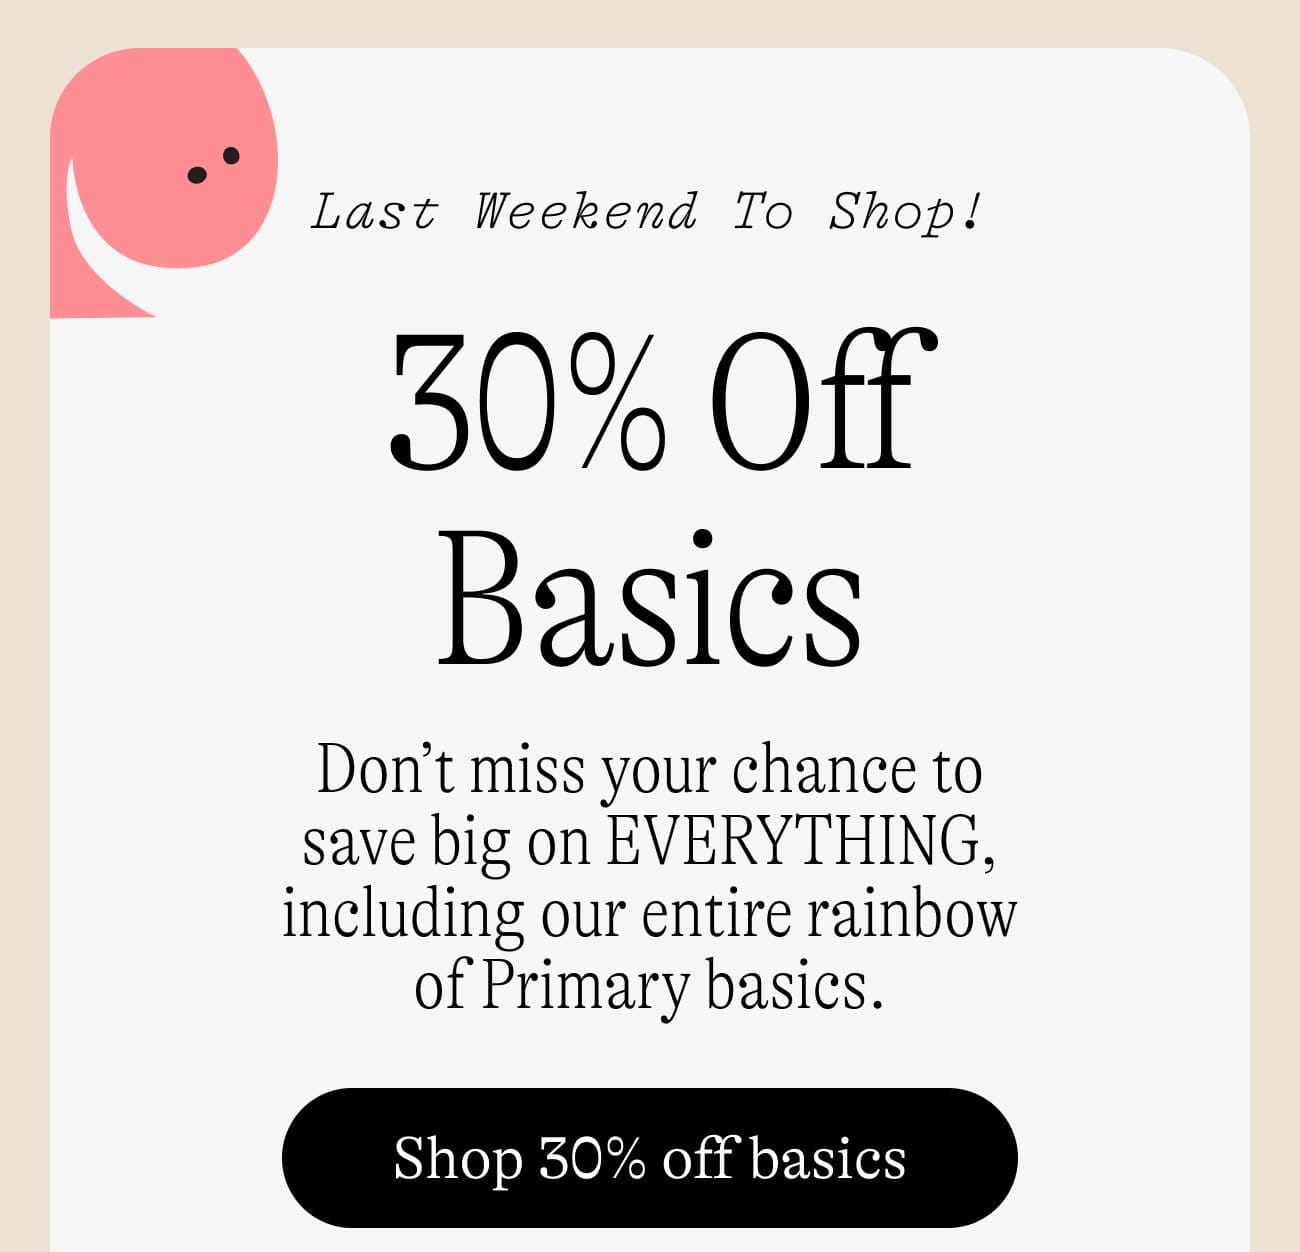 Last Weekend to Shop! 30% Off Basics. Don’t miss your chance to save big on EVERYTHING, including our entire rainbow of Primary basics. Shop 30% off basics